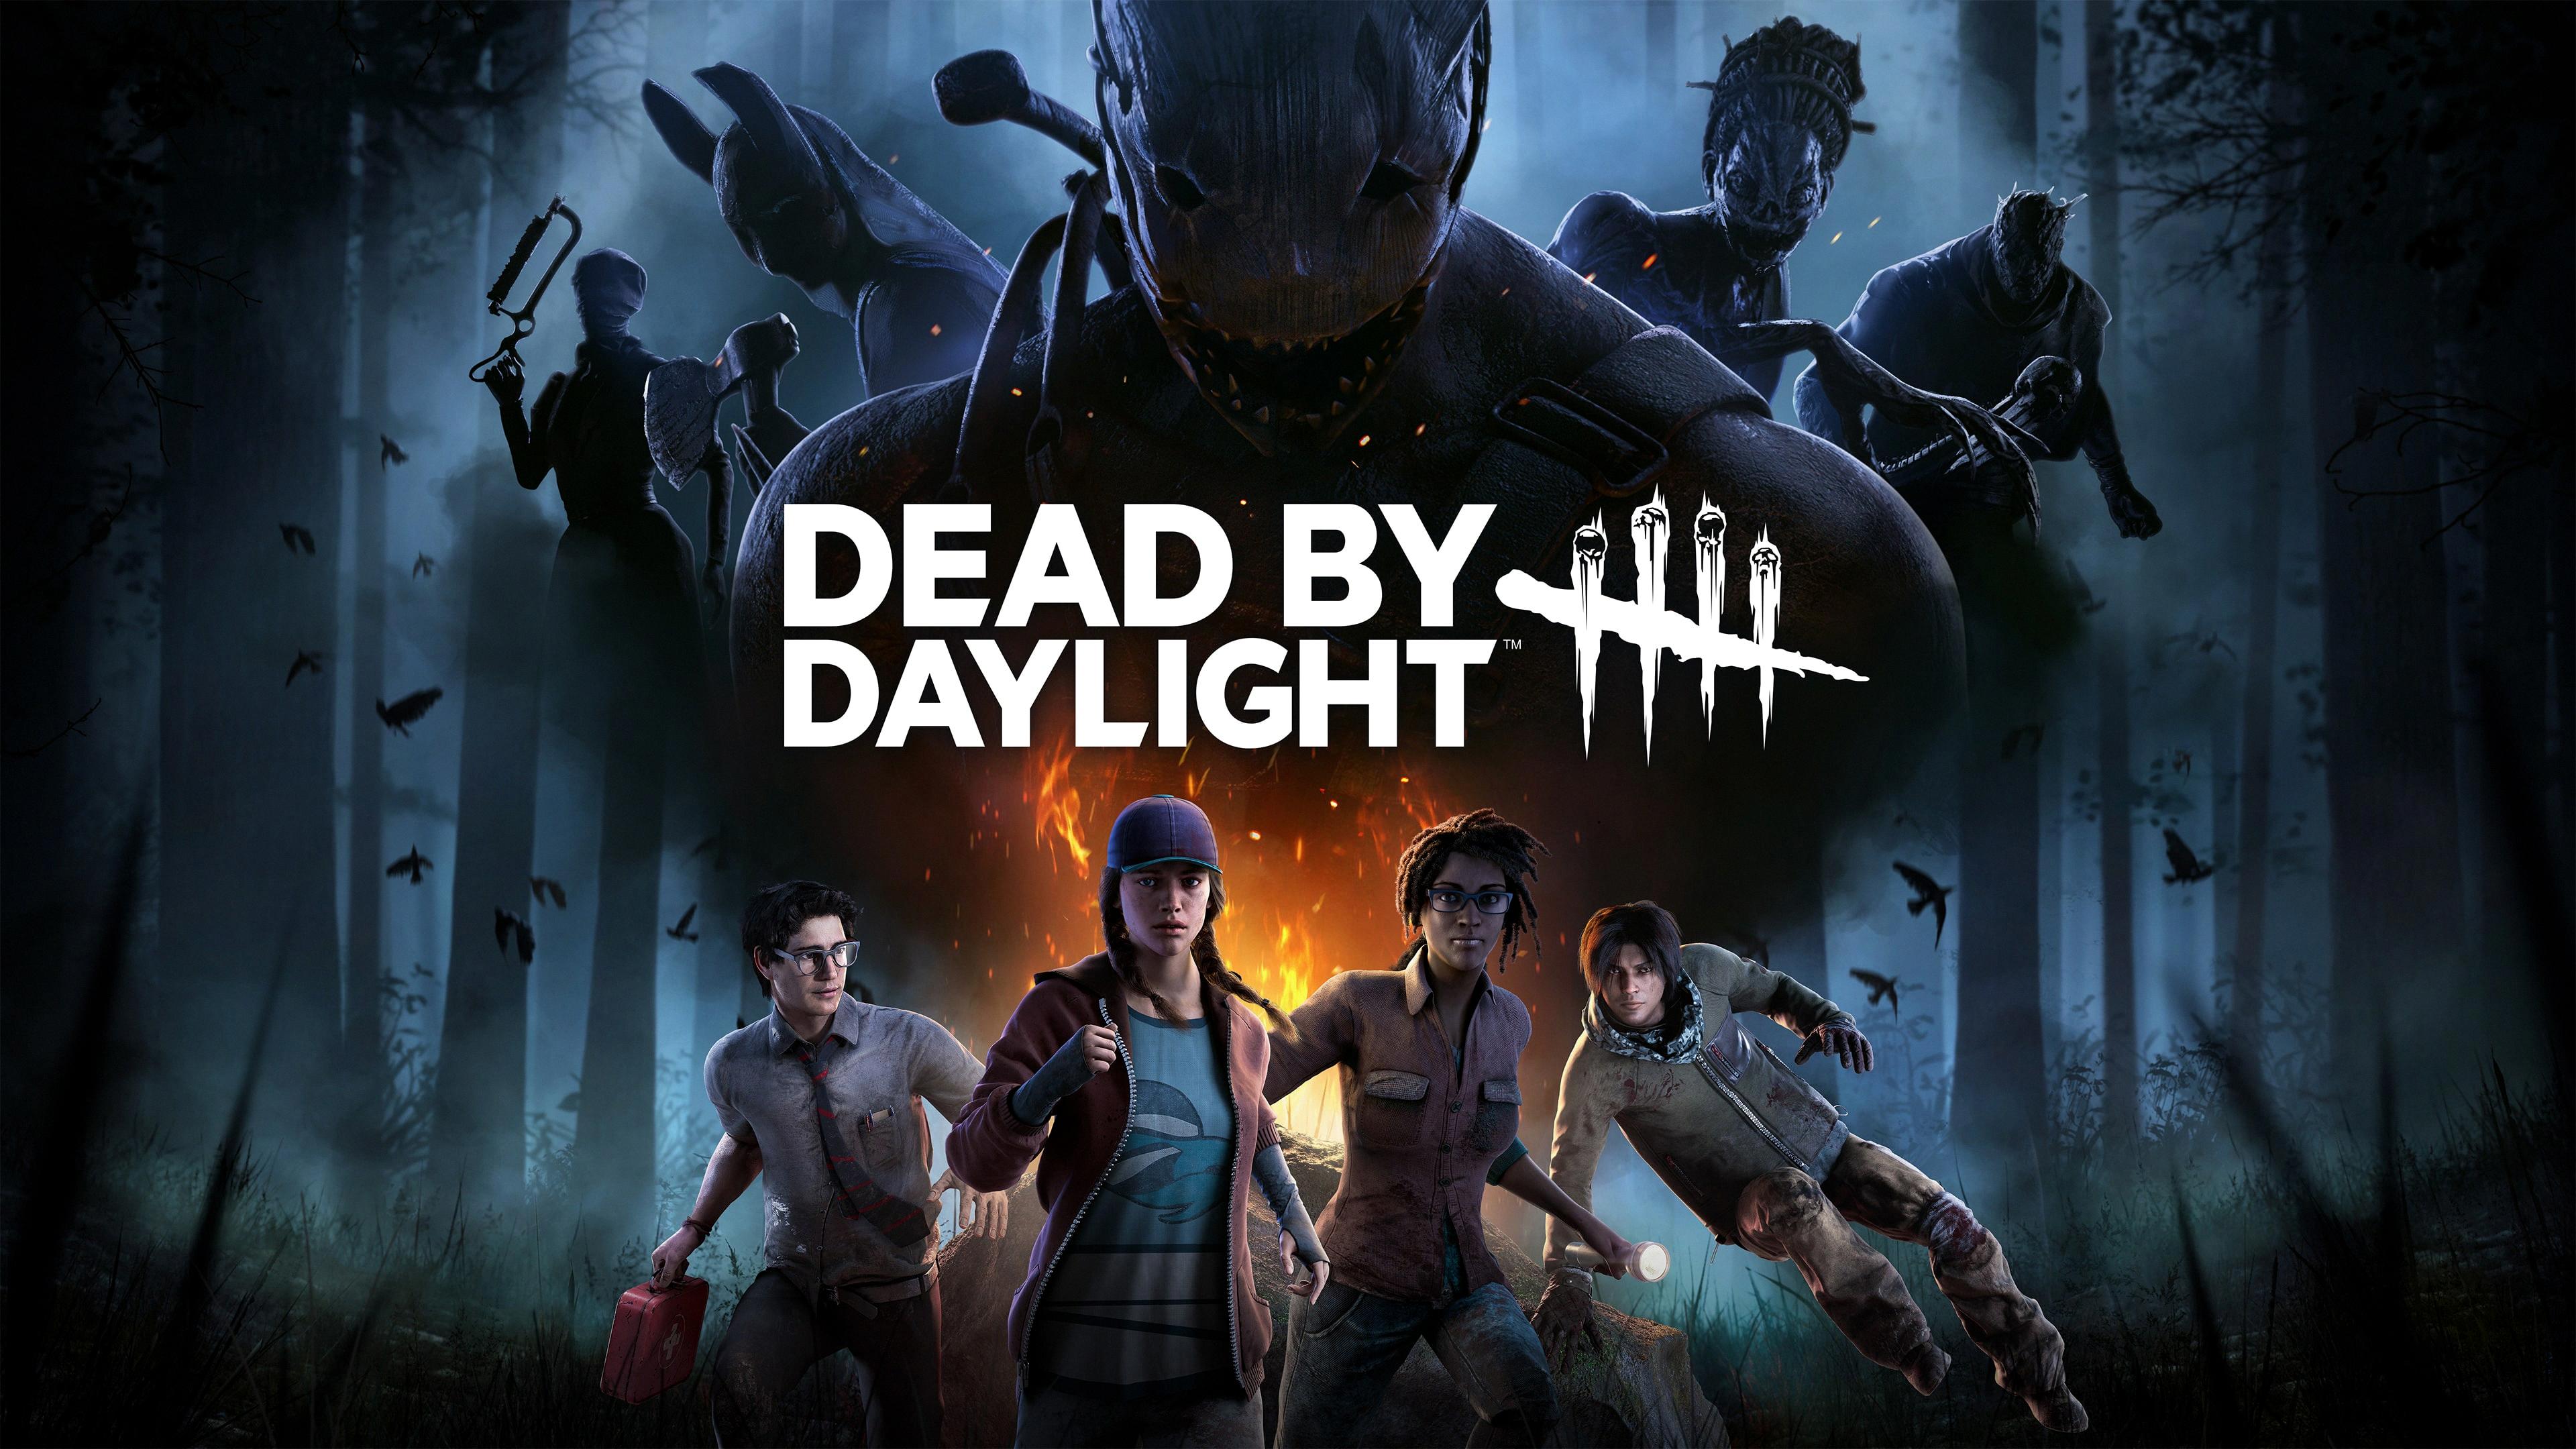 How To Find Matches Faster in Dead By Daylight? 5